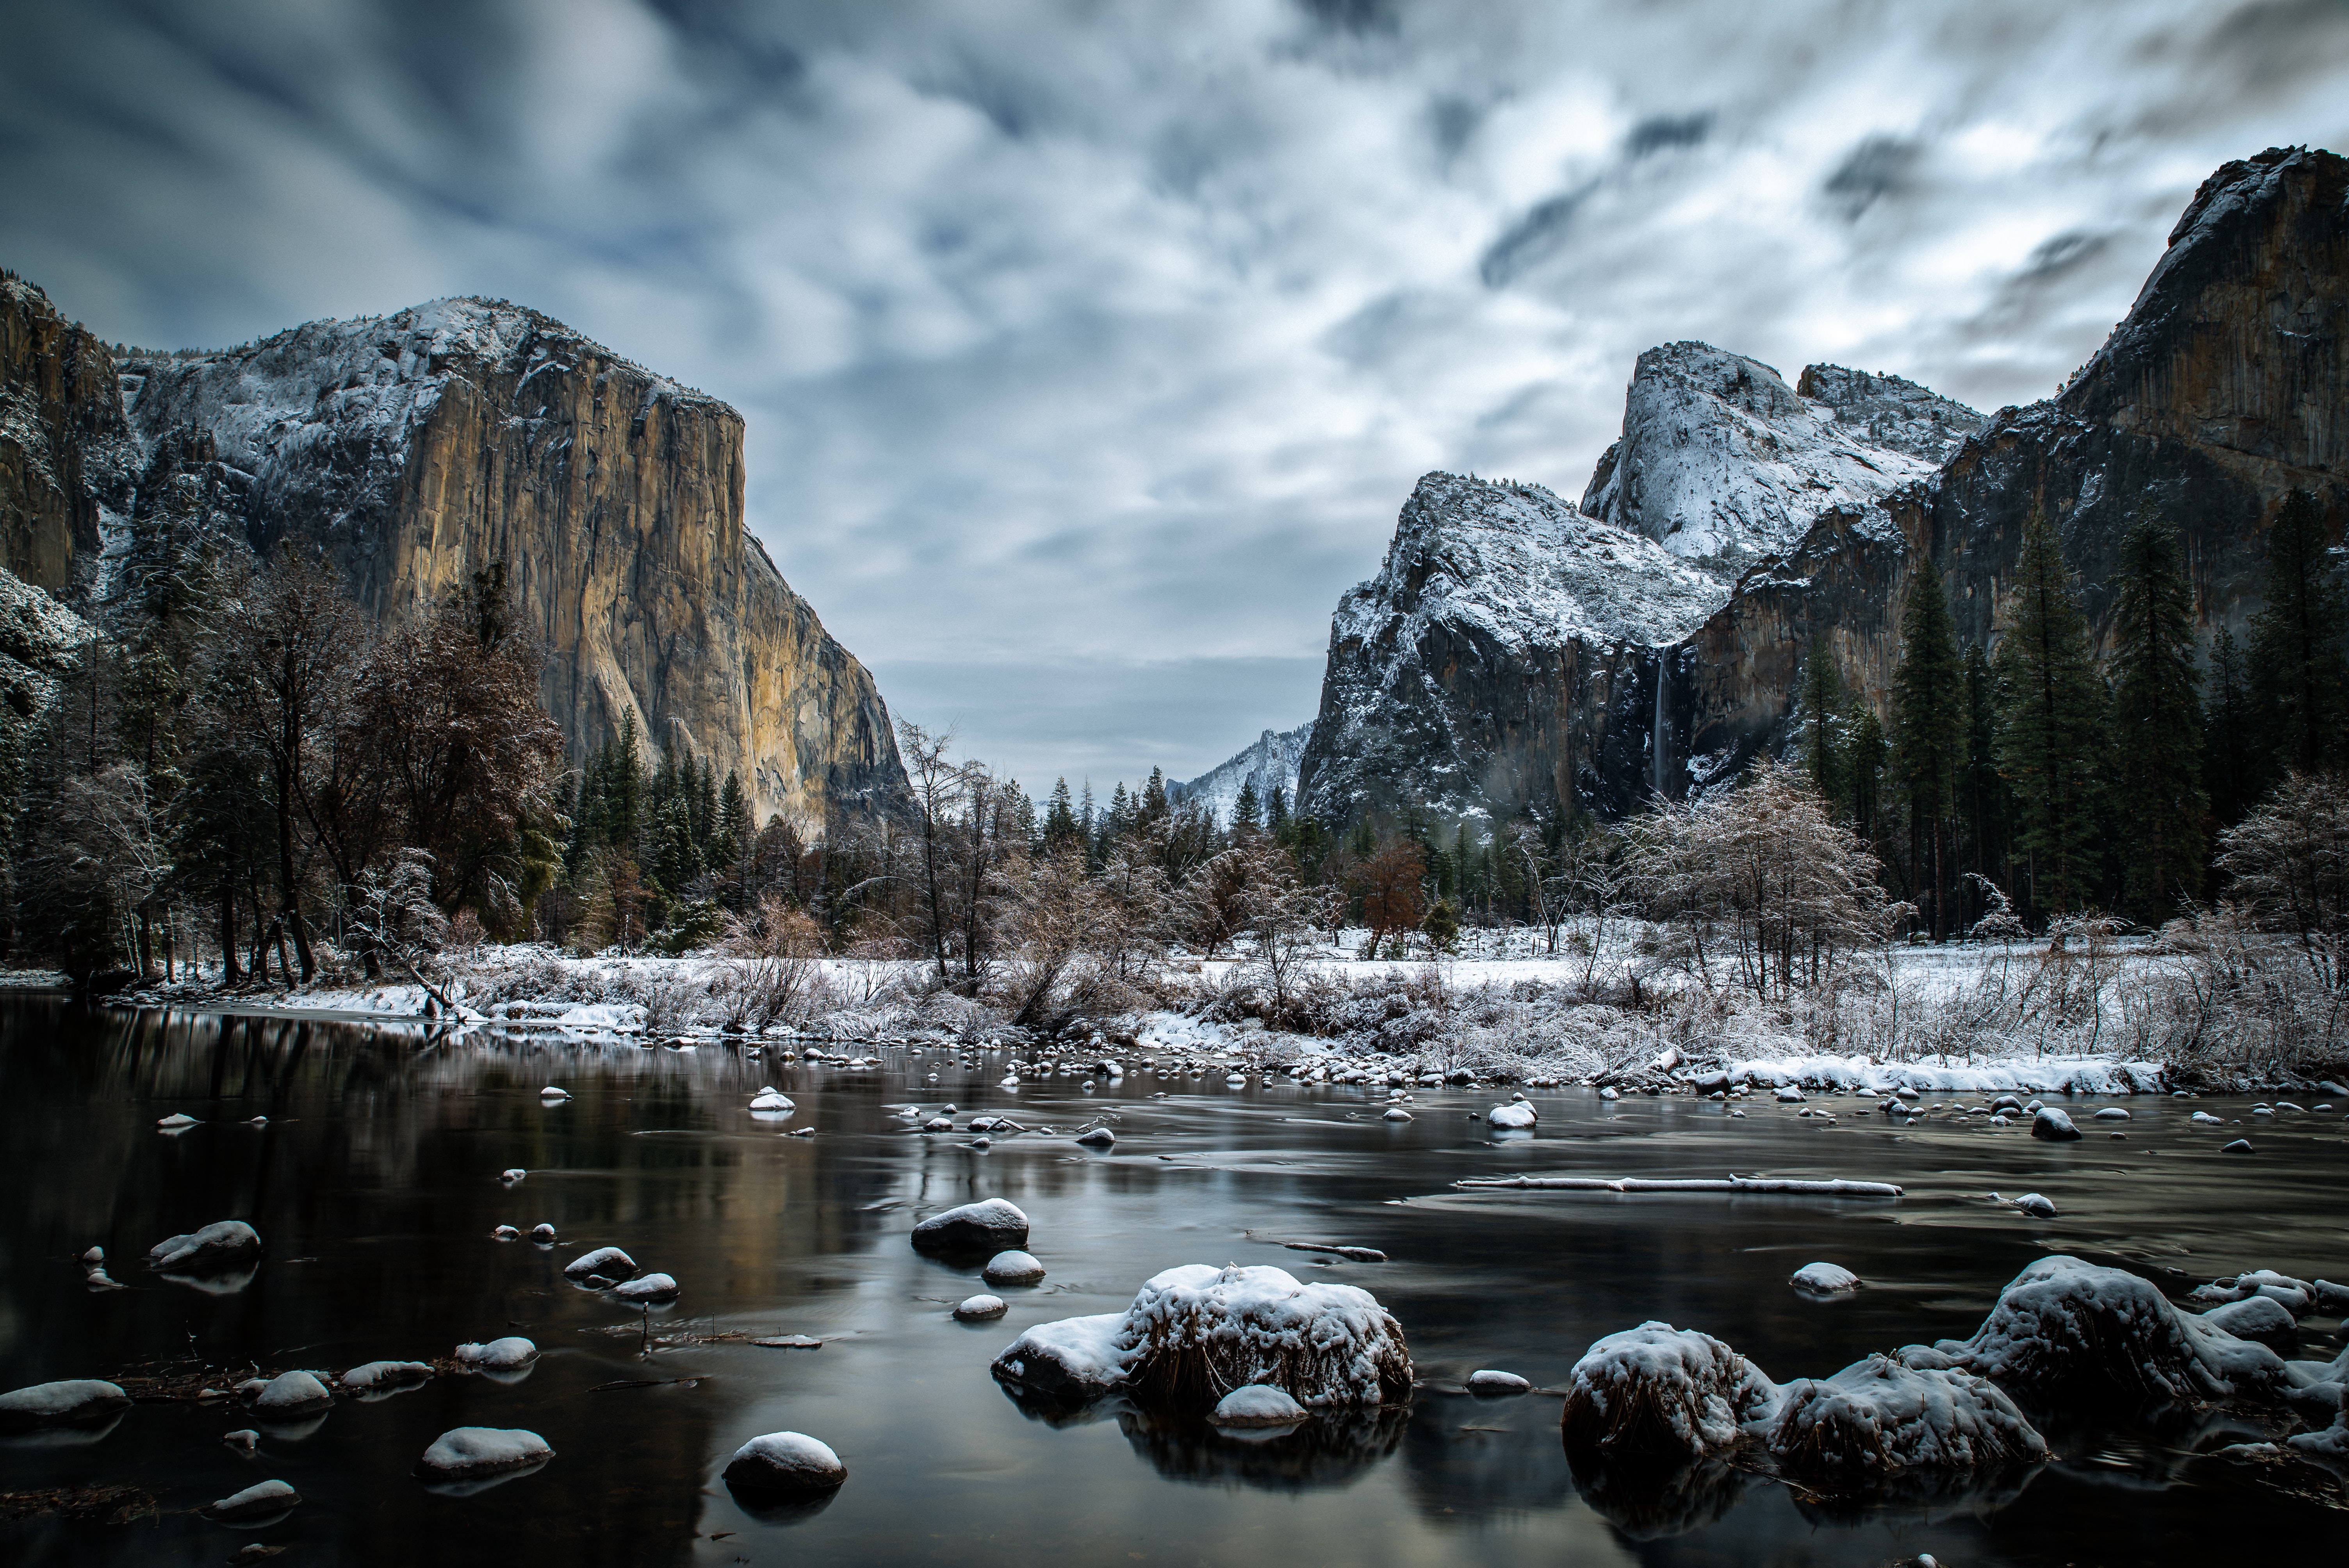 General 6016x4016 nature landscape mountains clouds long exposure river forest trees winter